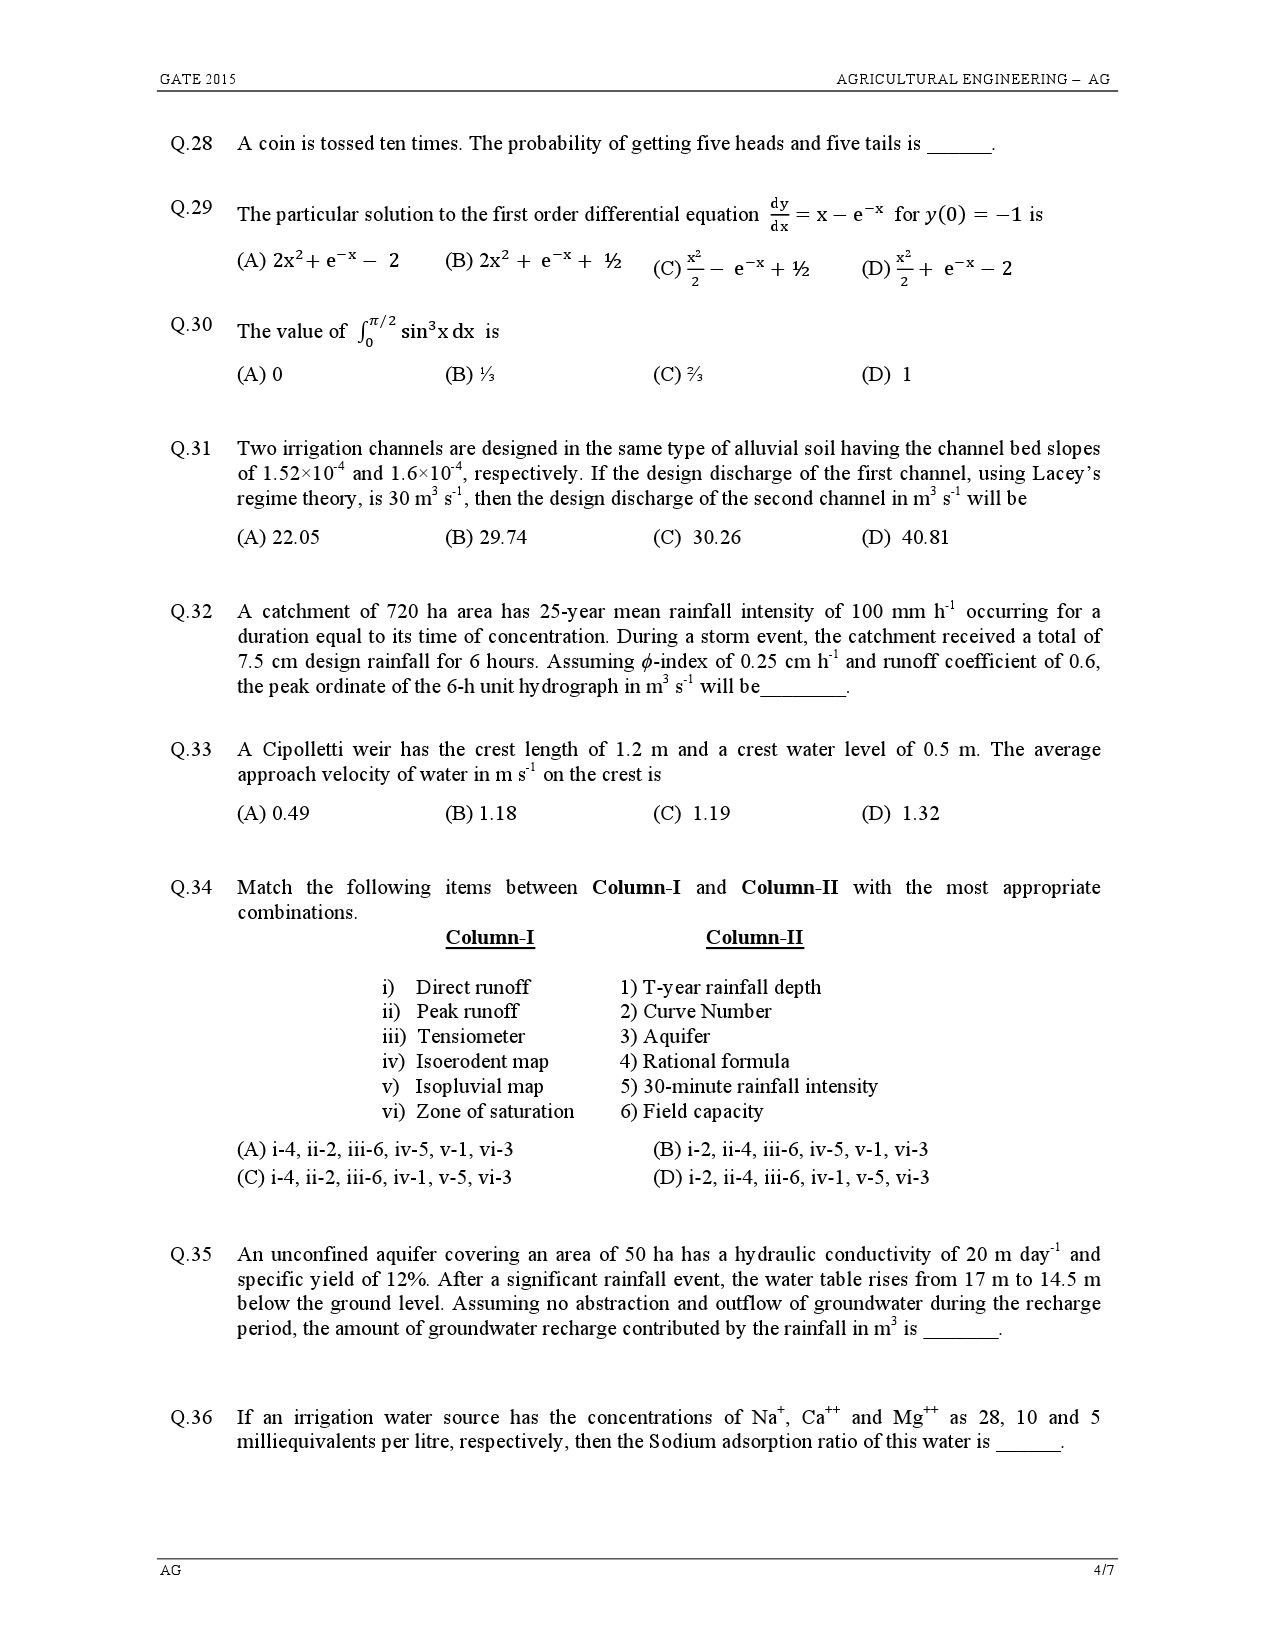 GATE Exam Question Paper 2015 Agricultural Engineering 4